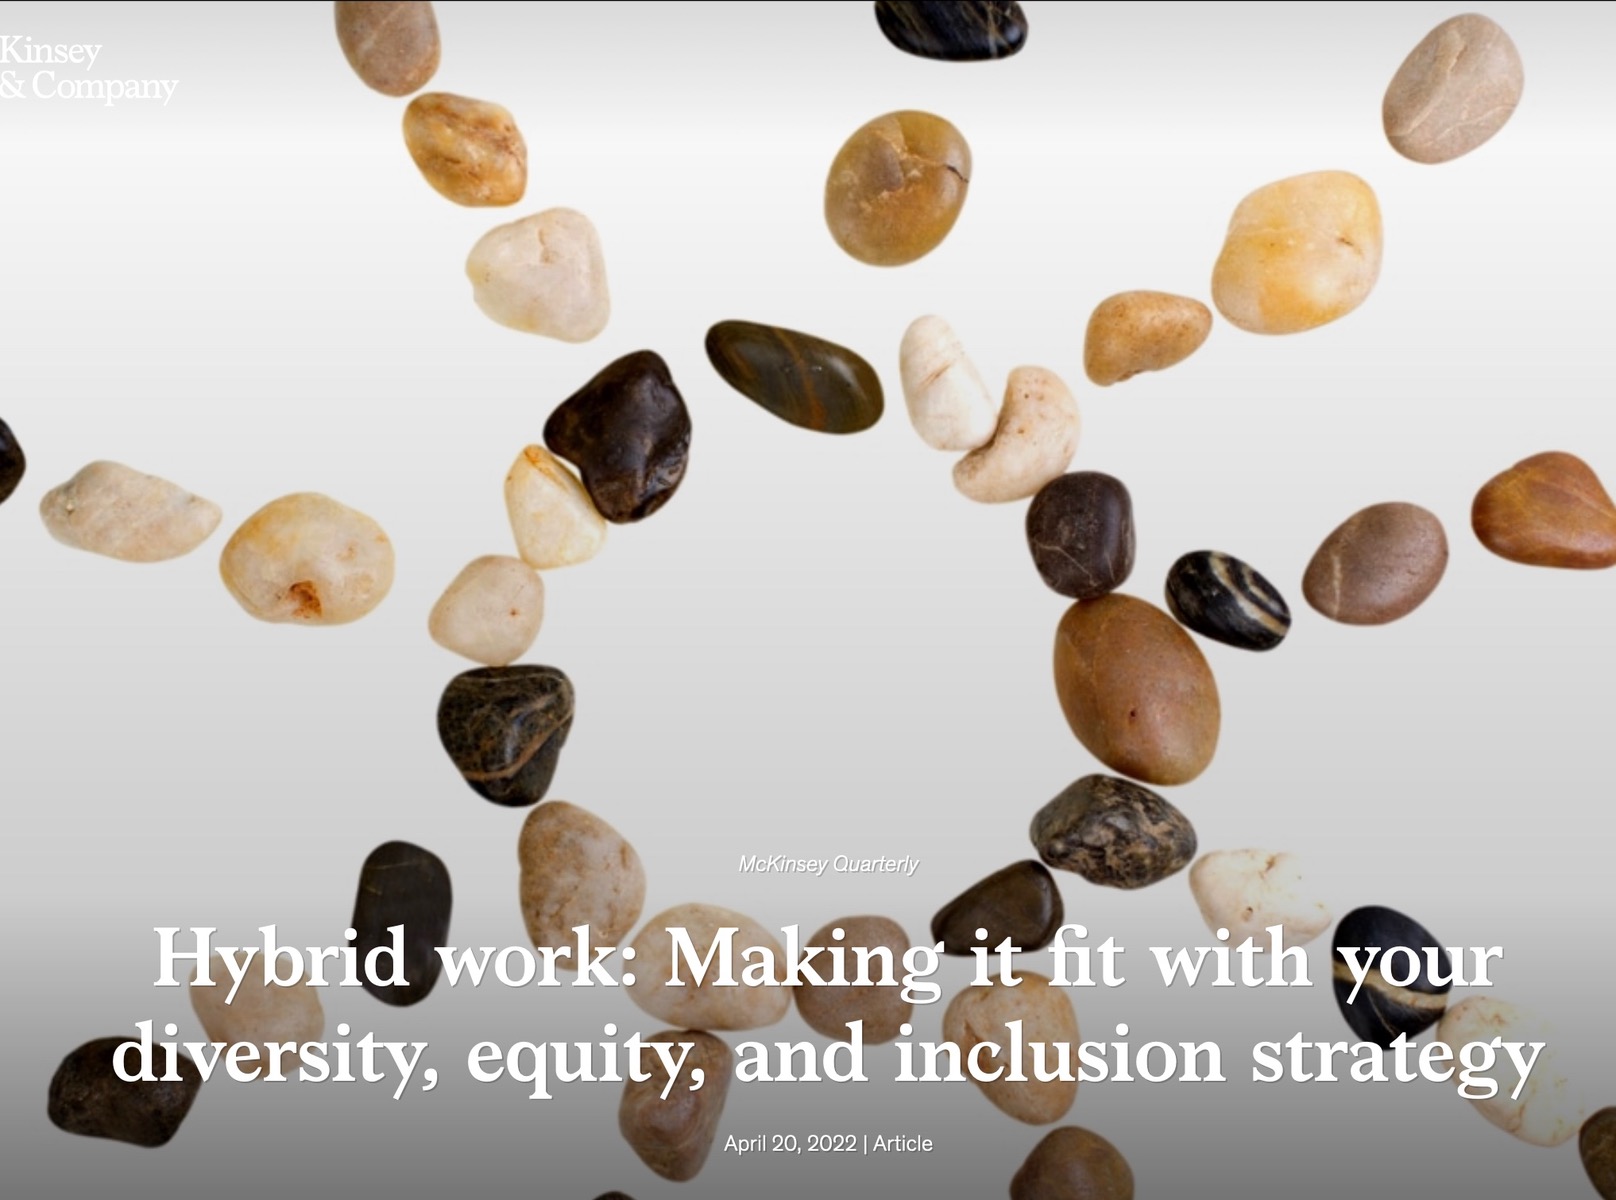 Hybrid work: Making it fit with your diversity, equity, and inclusion strategy